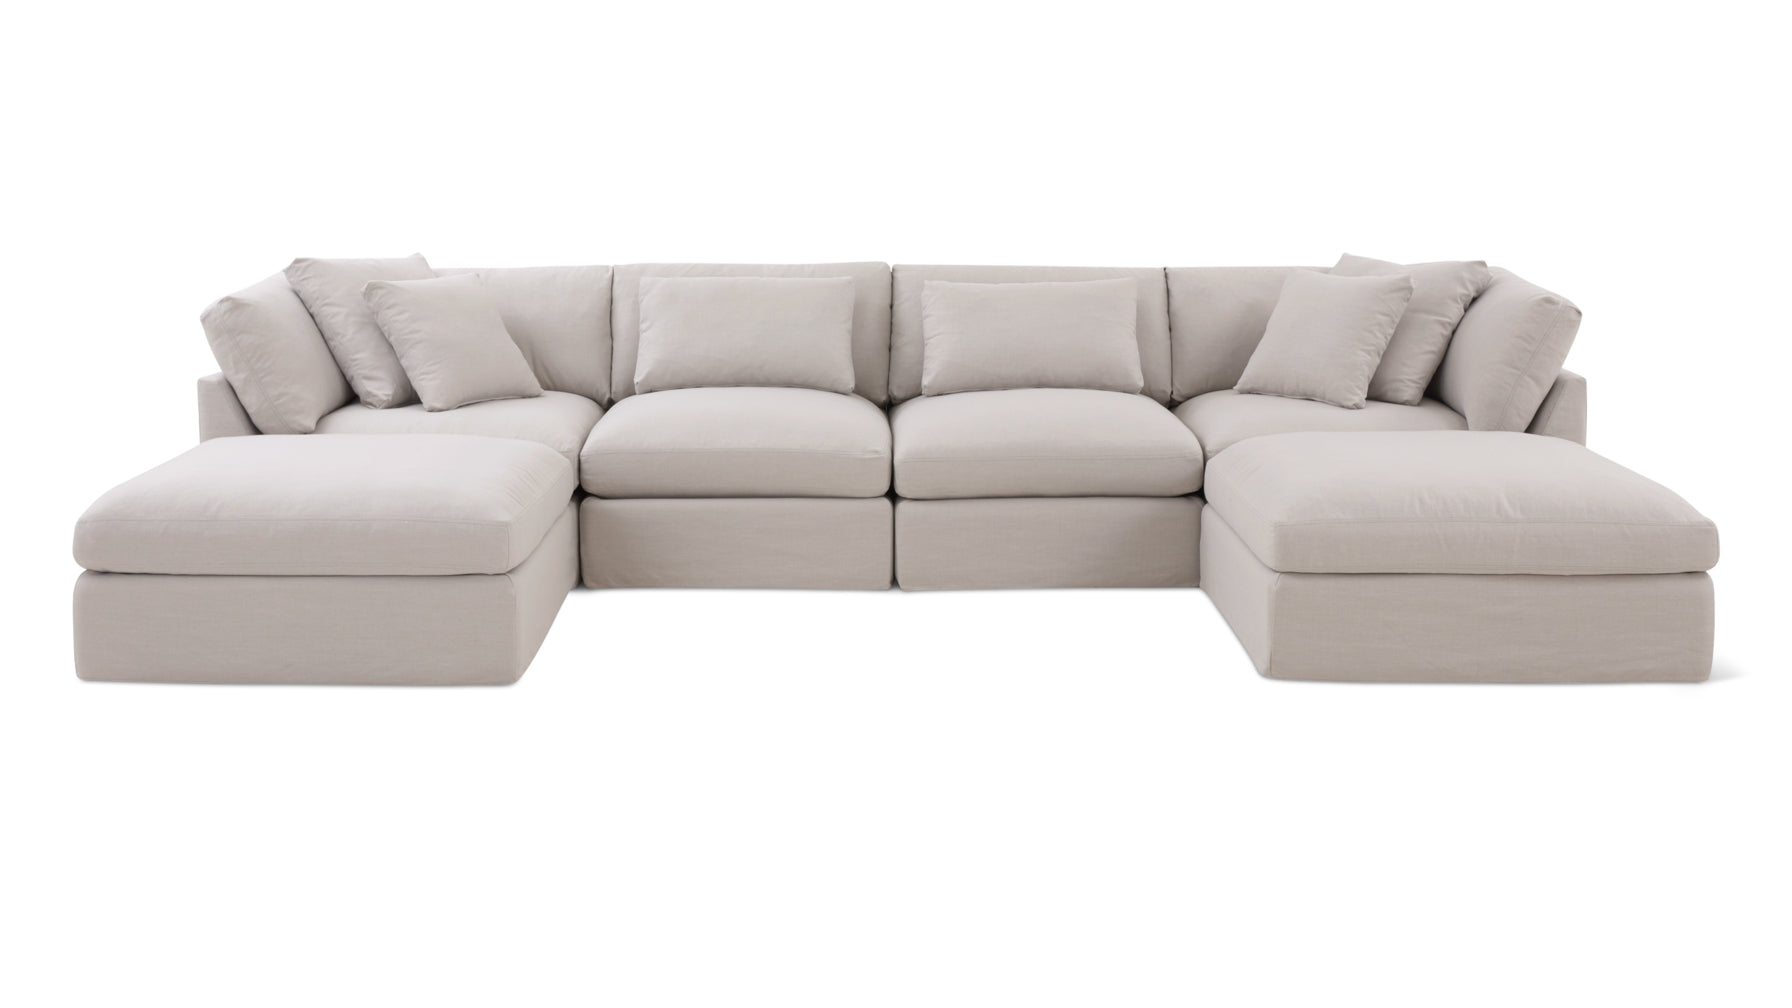 Get Together™ 6-Piece Modular U-Shaped Sectional, Large, Clay - Image 1